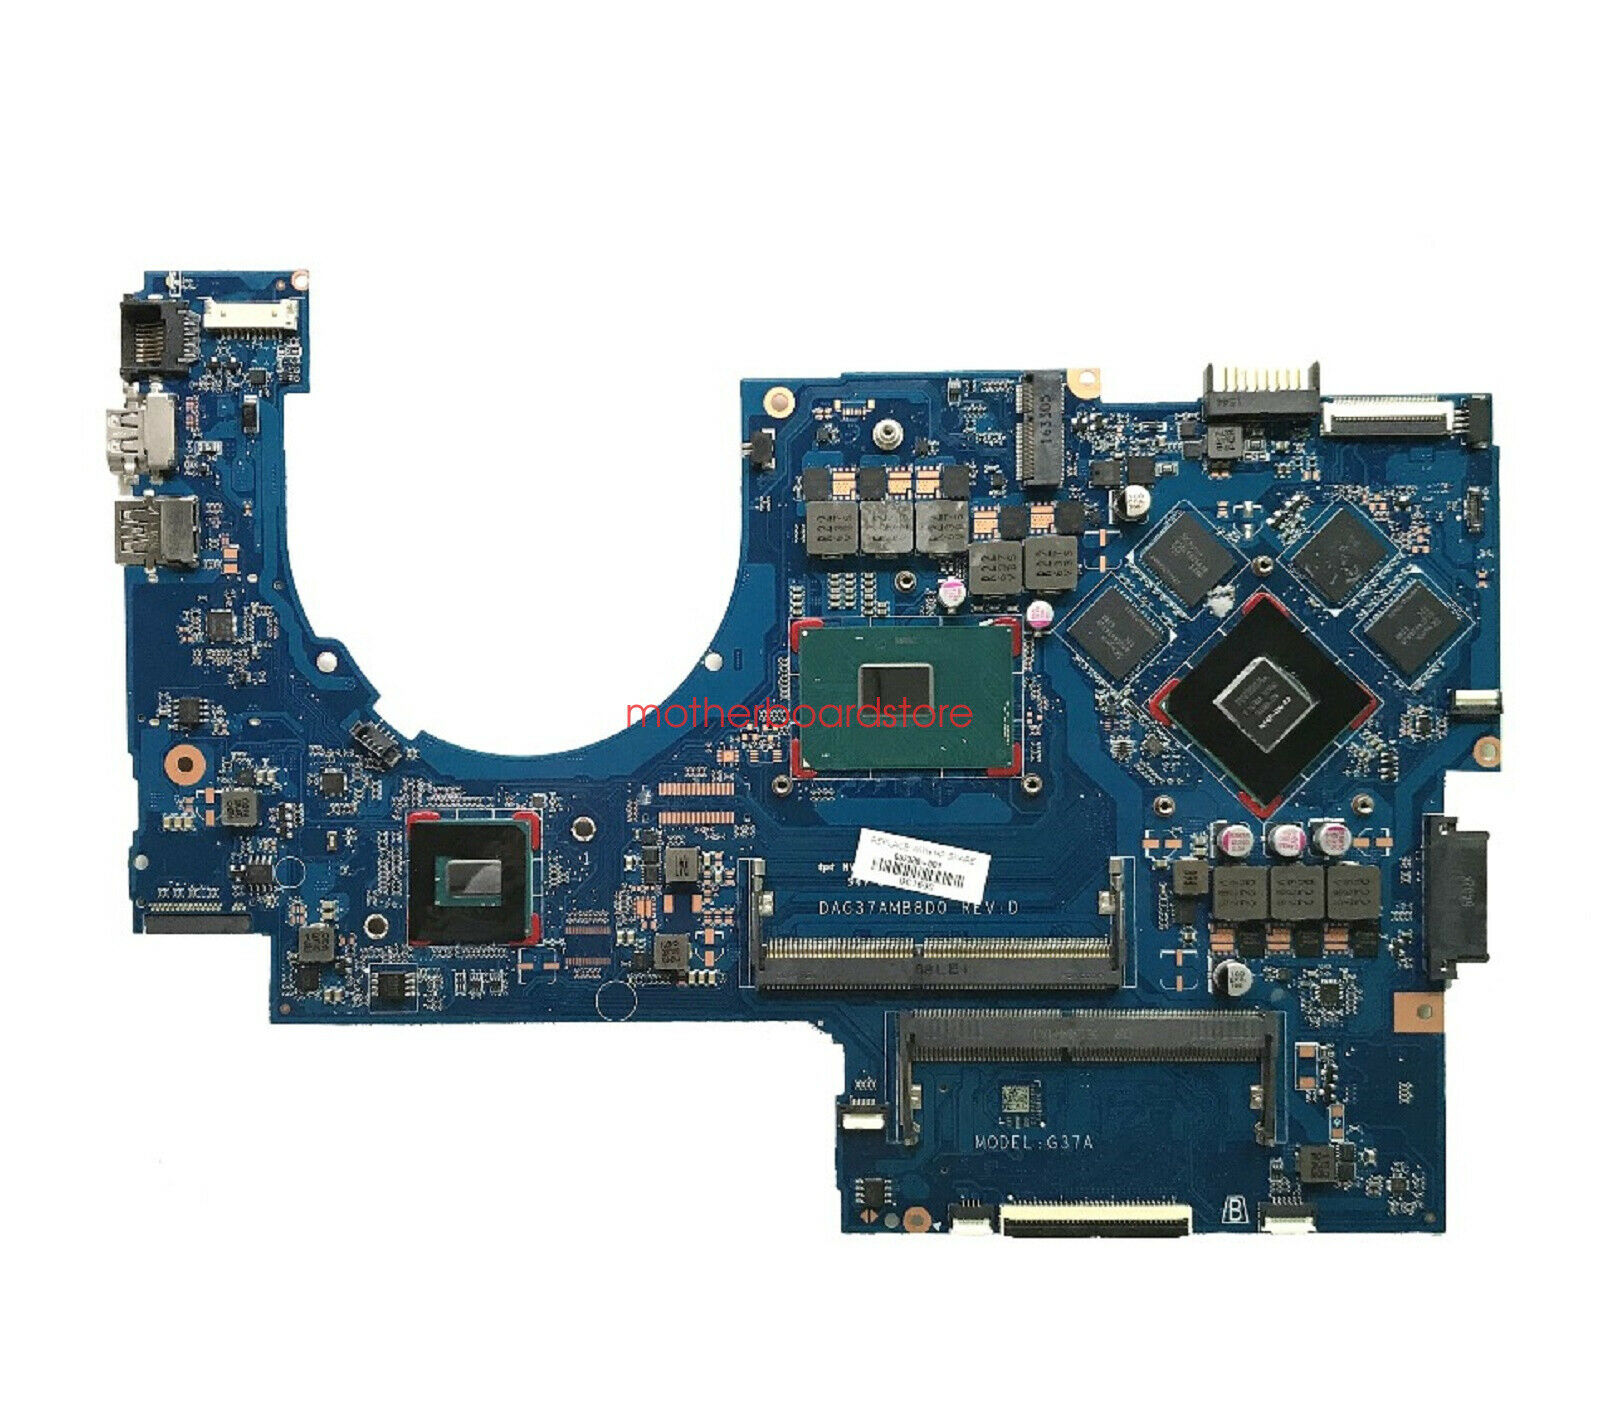 HP 17-AB 17-W w/i7-6700HQ CPU Motherboard DAG37AMB8D0 857388-601 857388-001 Test Brand: HP Number of Memo